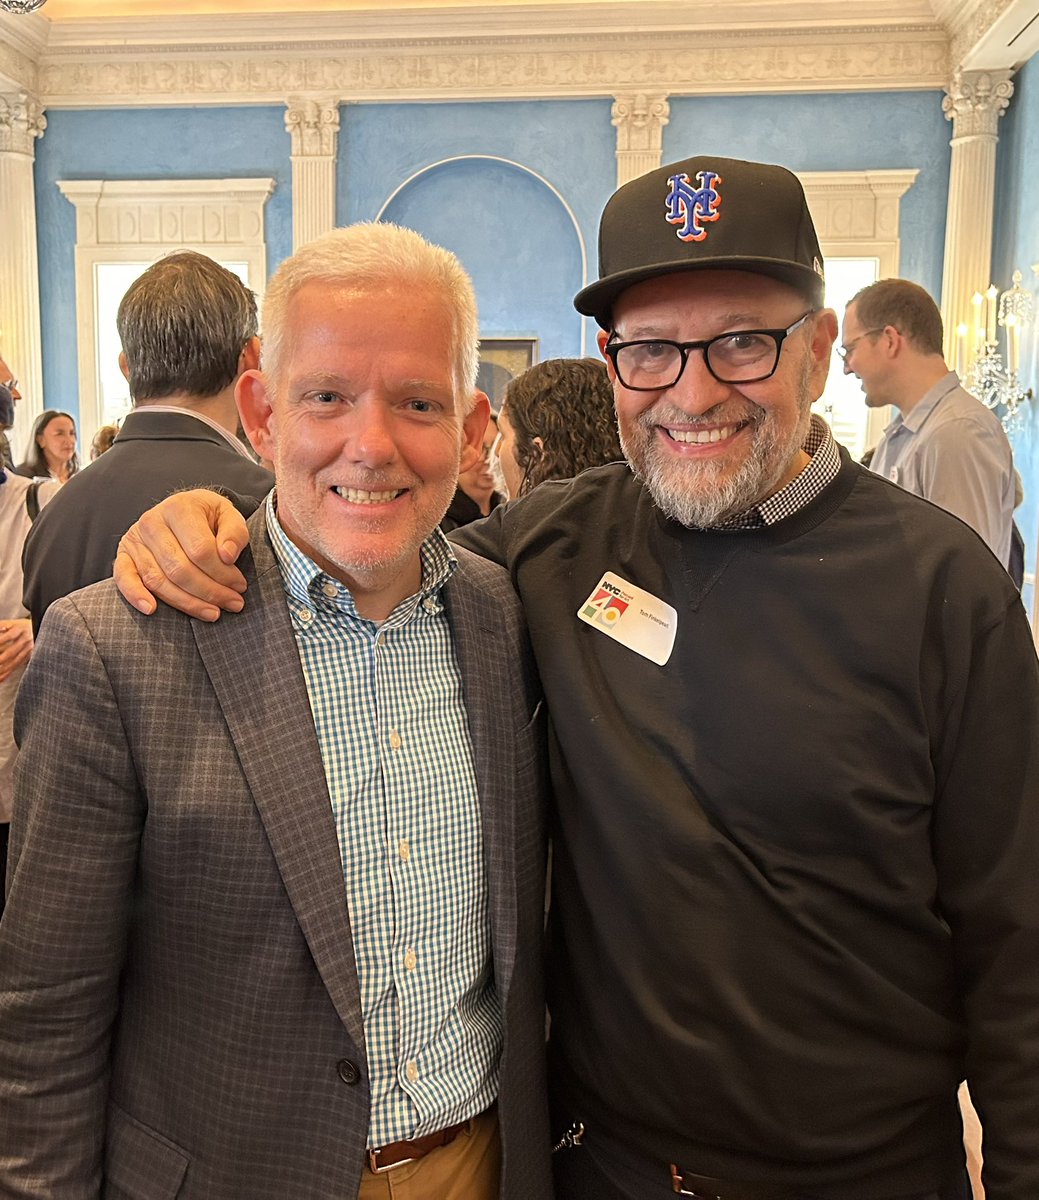 Great to see former @NYCulture Commissioner Tom Finkelpearl at Gracie Mansion for the 40th Anniversary of the percent for art program. Tom has great taste in baseball teams.